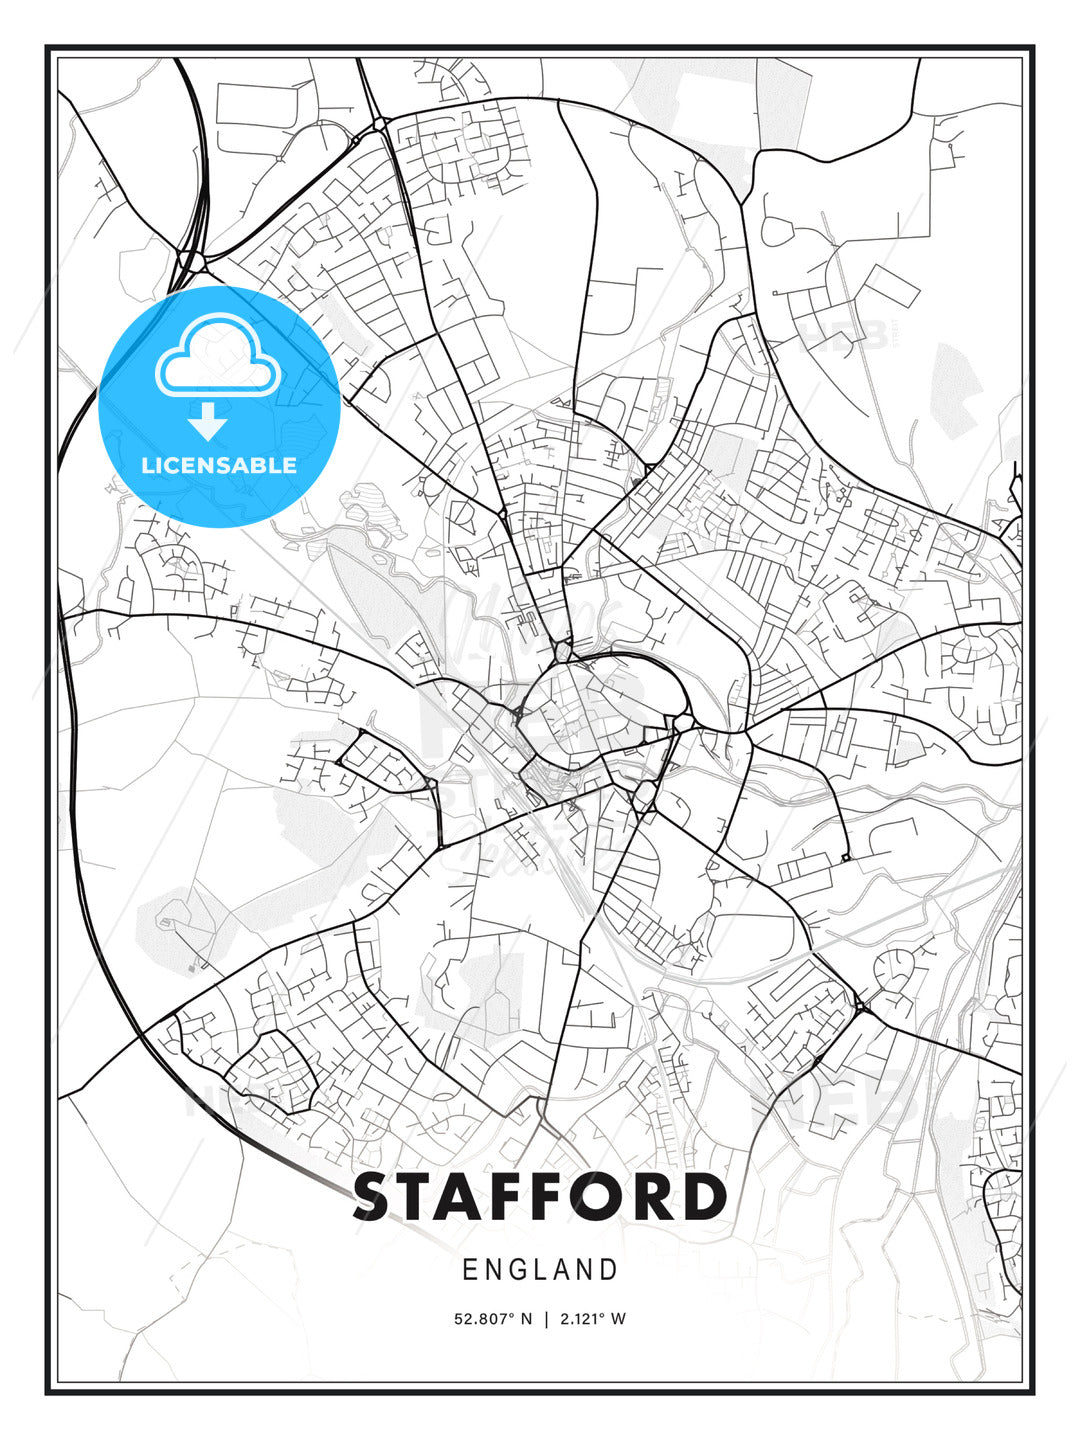 Stafford, England, Modern Print Template in Various Formats - HEBSTREITS Sketches